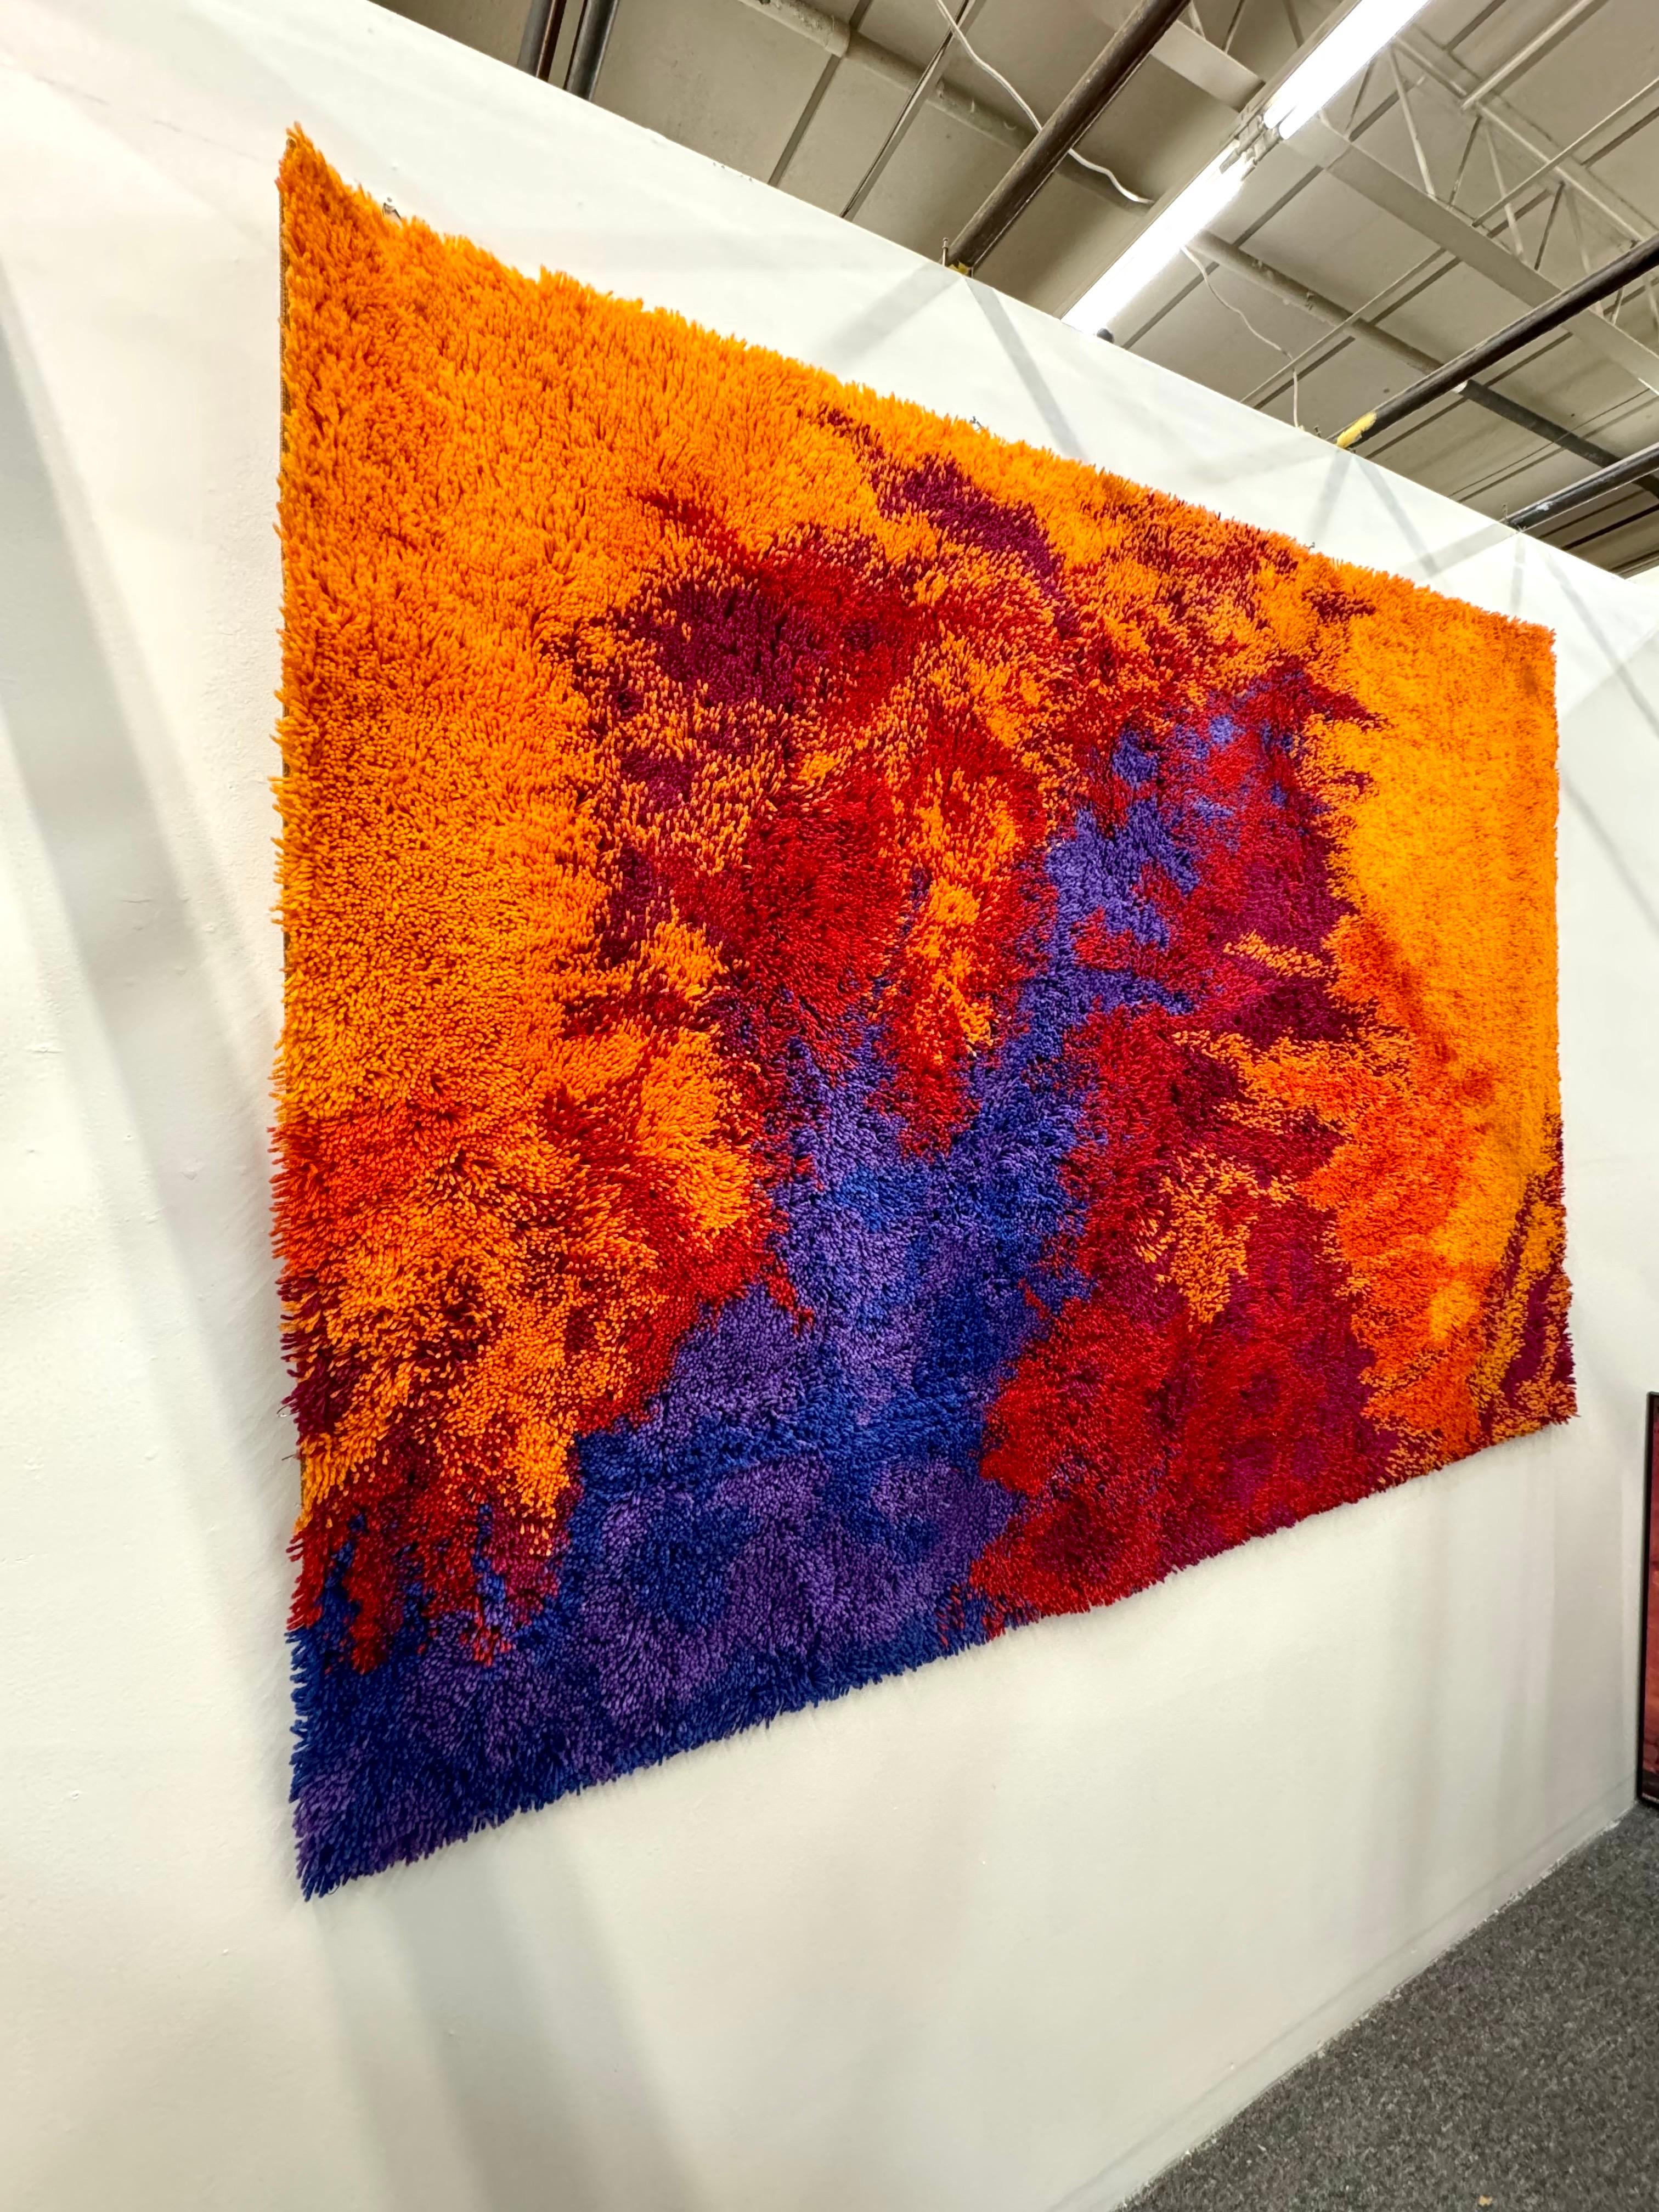 A vintage Danish area wool rug made by Rya in Denmark circa 1960s. The bright colored rug features long shaggy fibers and remains in excellent condition. On the background of mottled red colors in subtle different shades, splashes of purple and